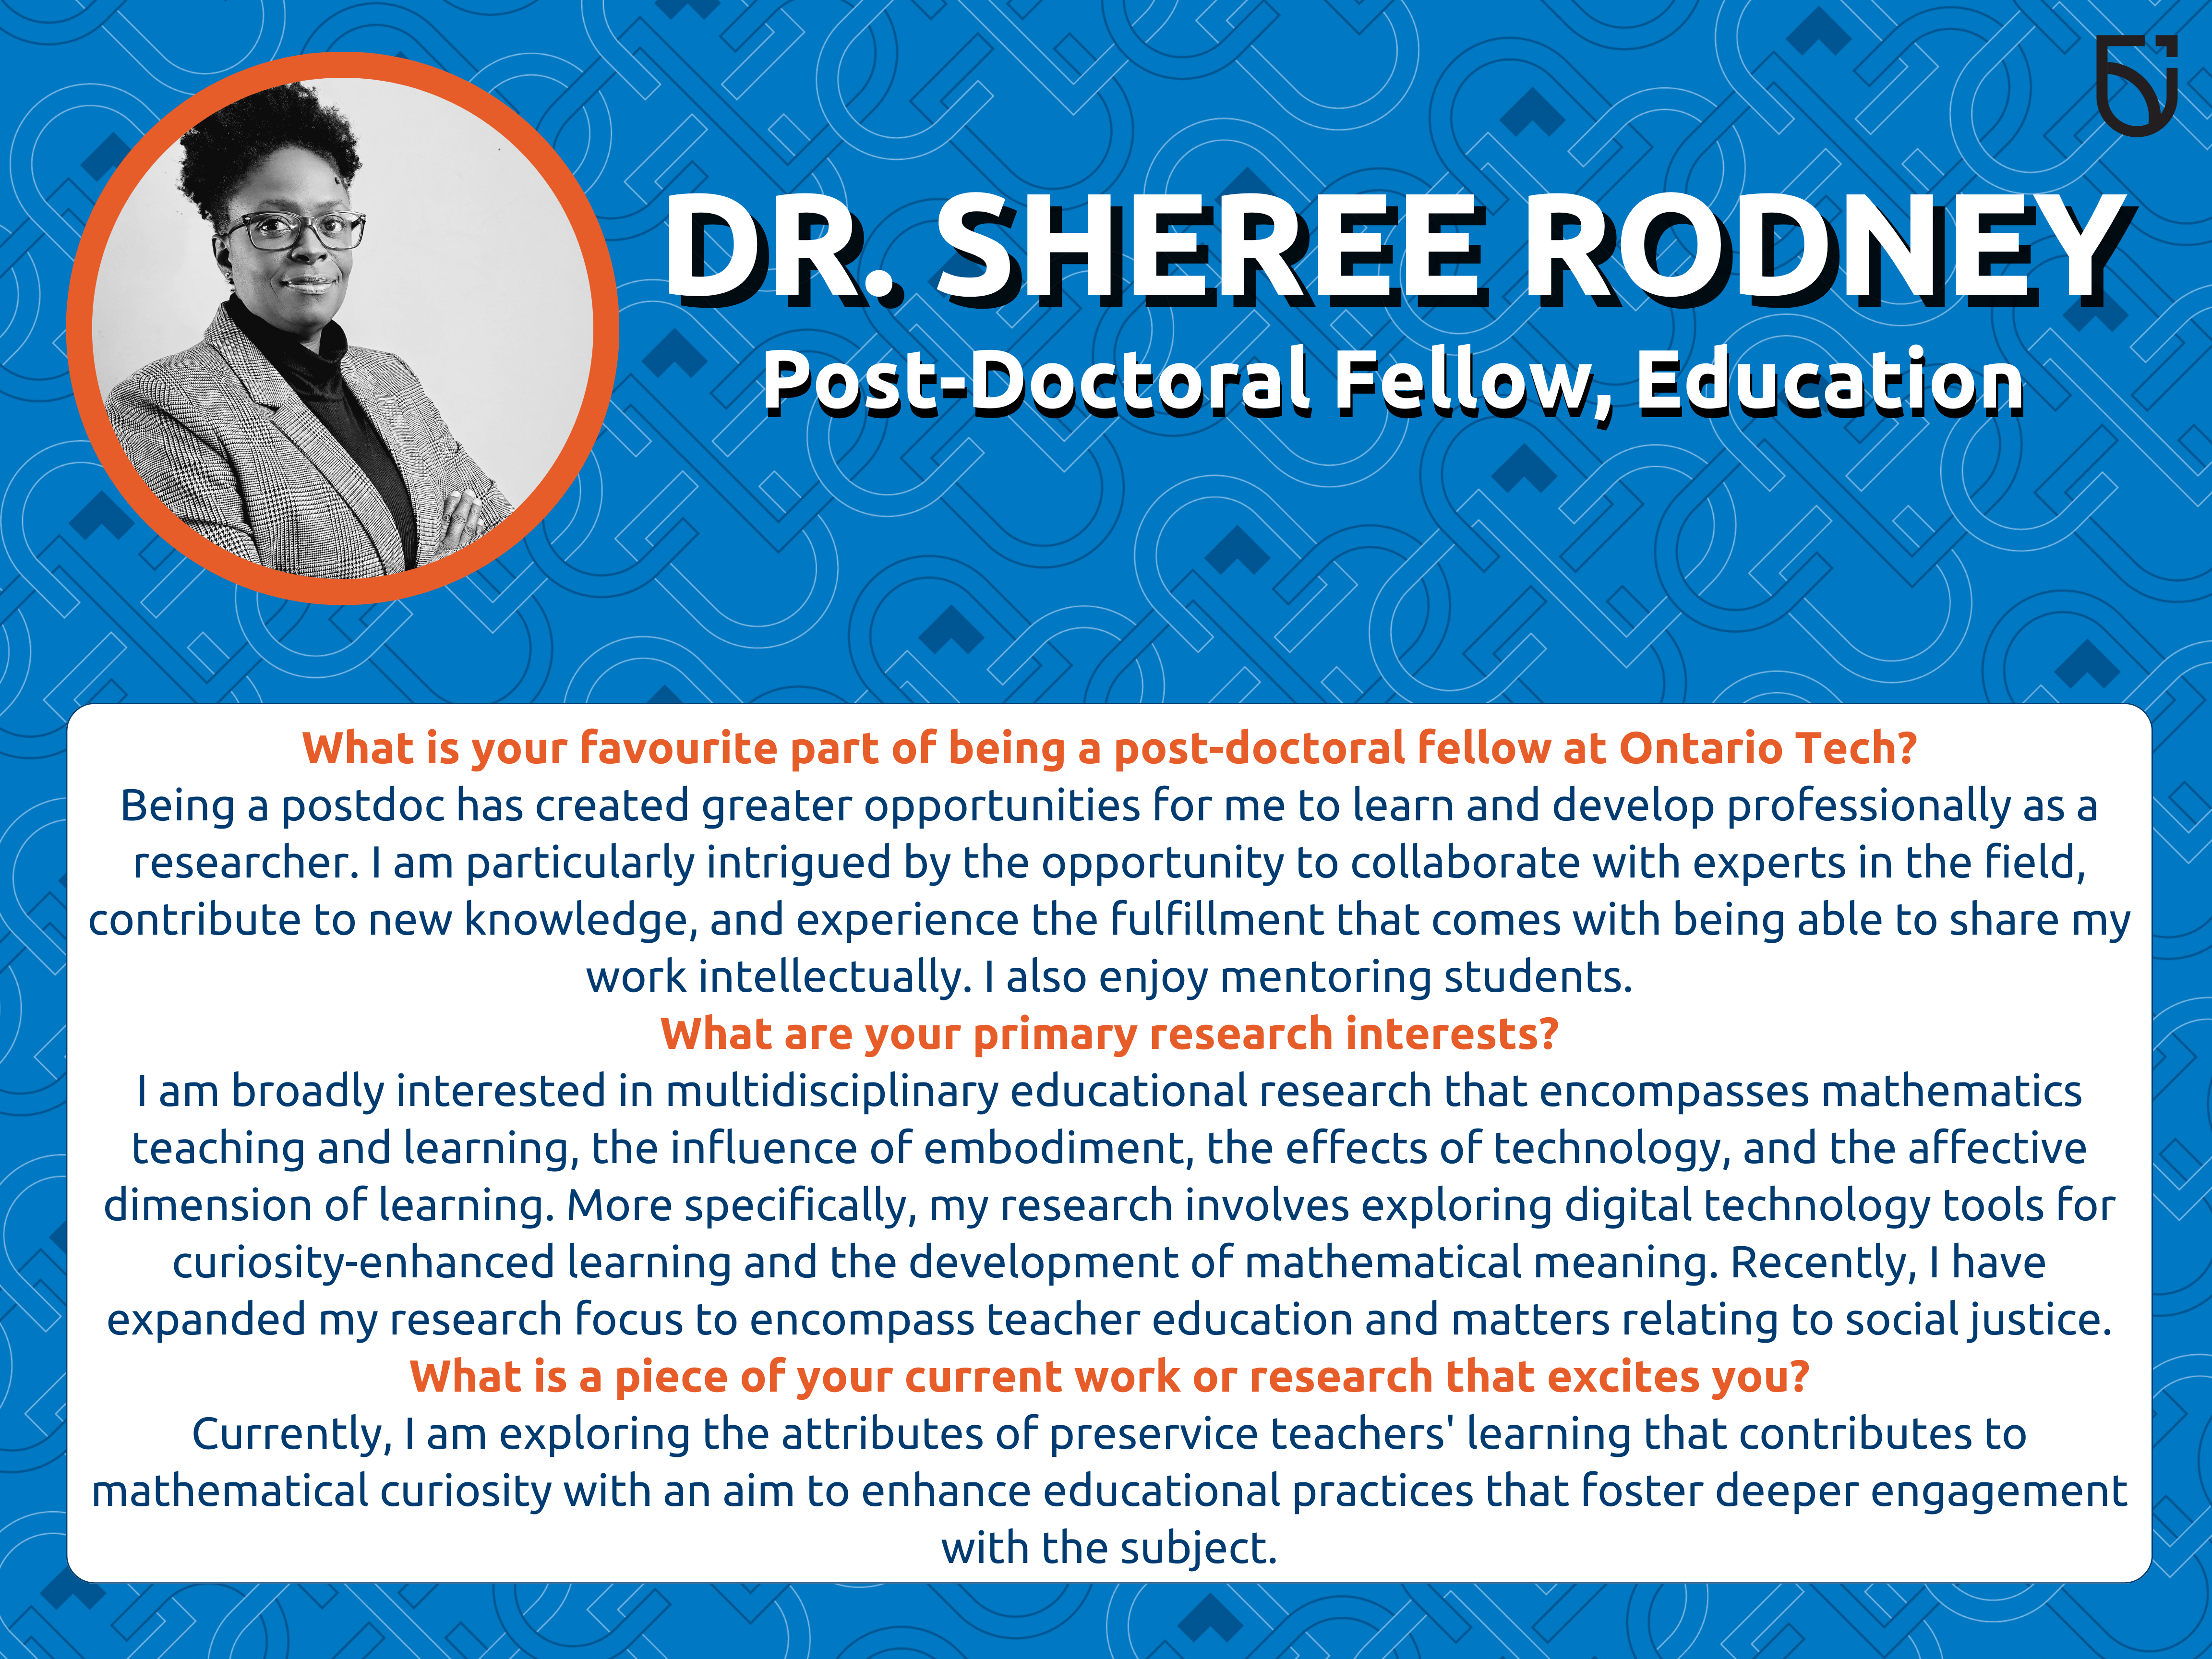 This photo is a Women’s Wednesday feature of Dr. Sheree Rodney, a Post-Doctoral Fellow in the Faculty of Education